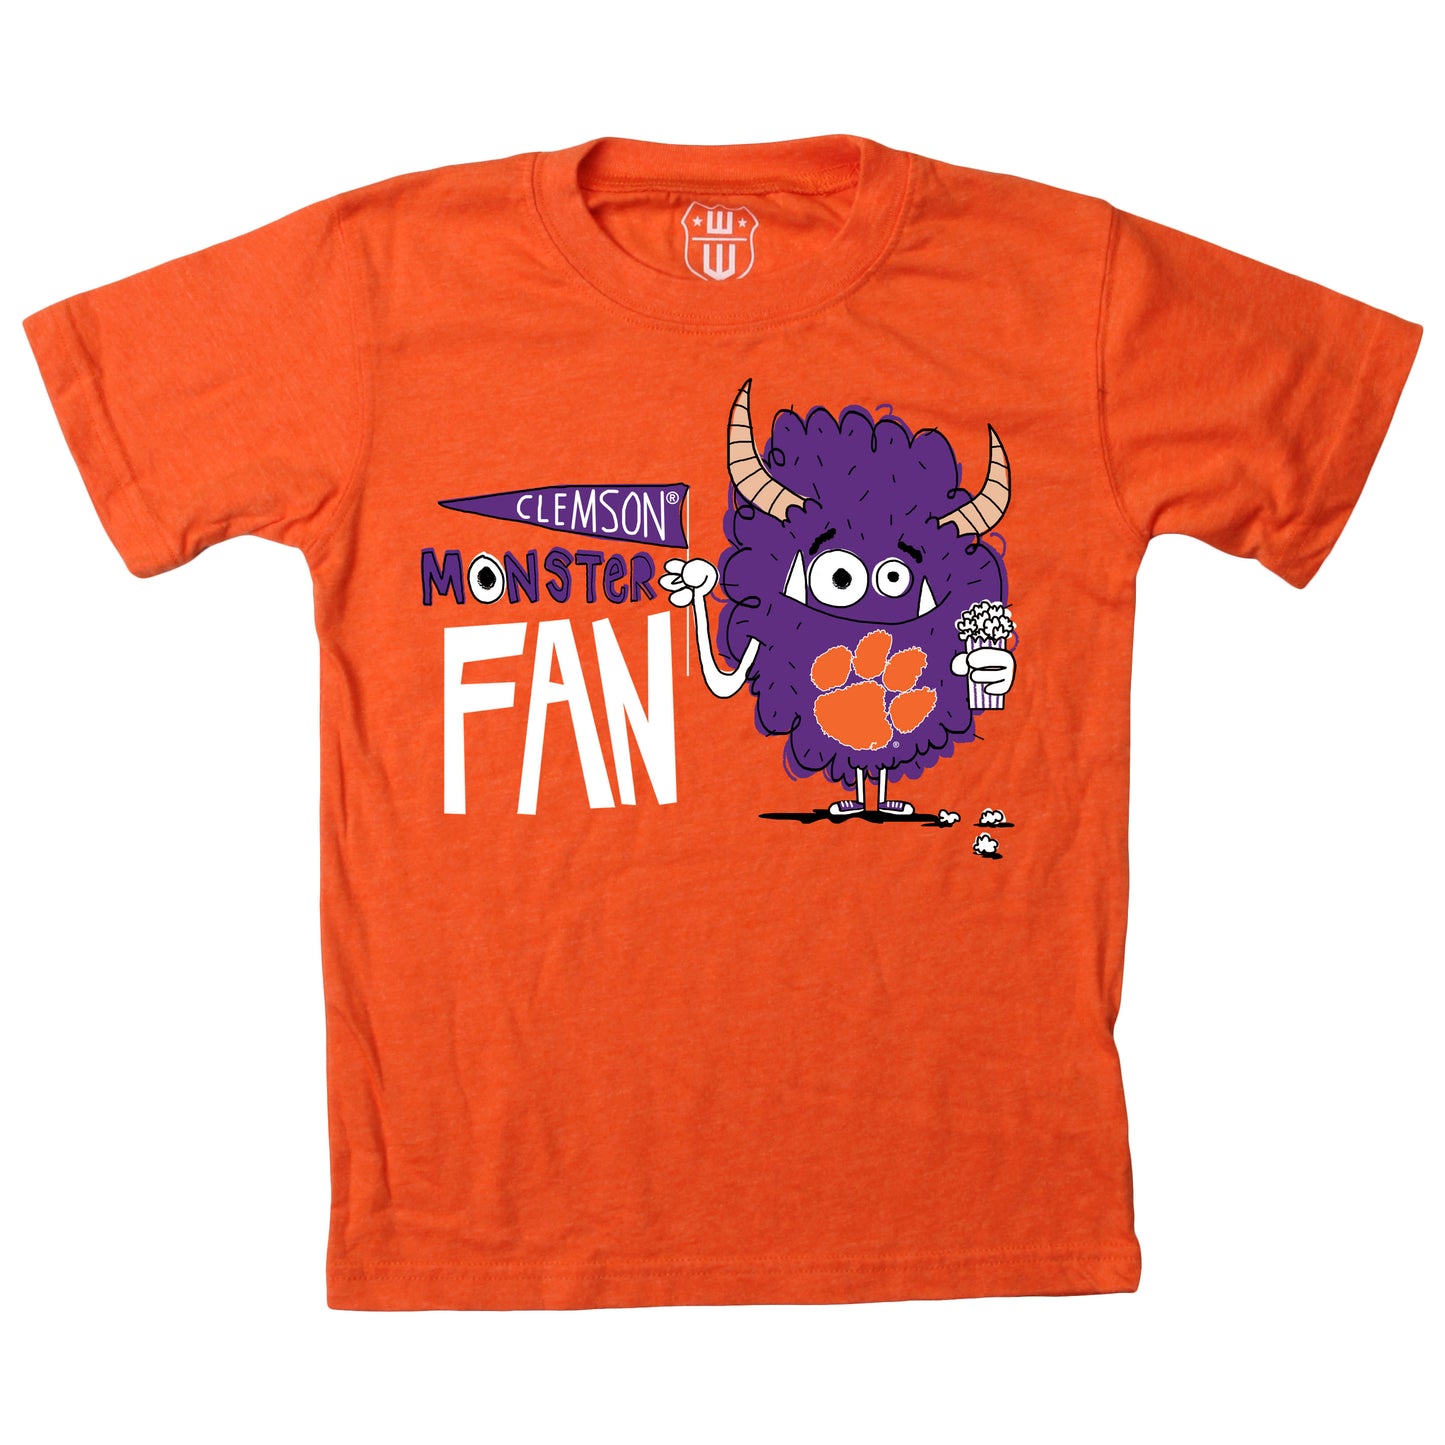 Clemson Tigers  Youth Monster Fan Tee